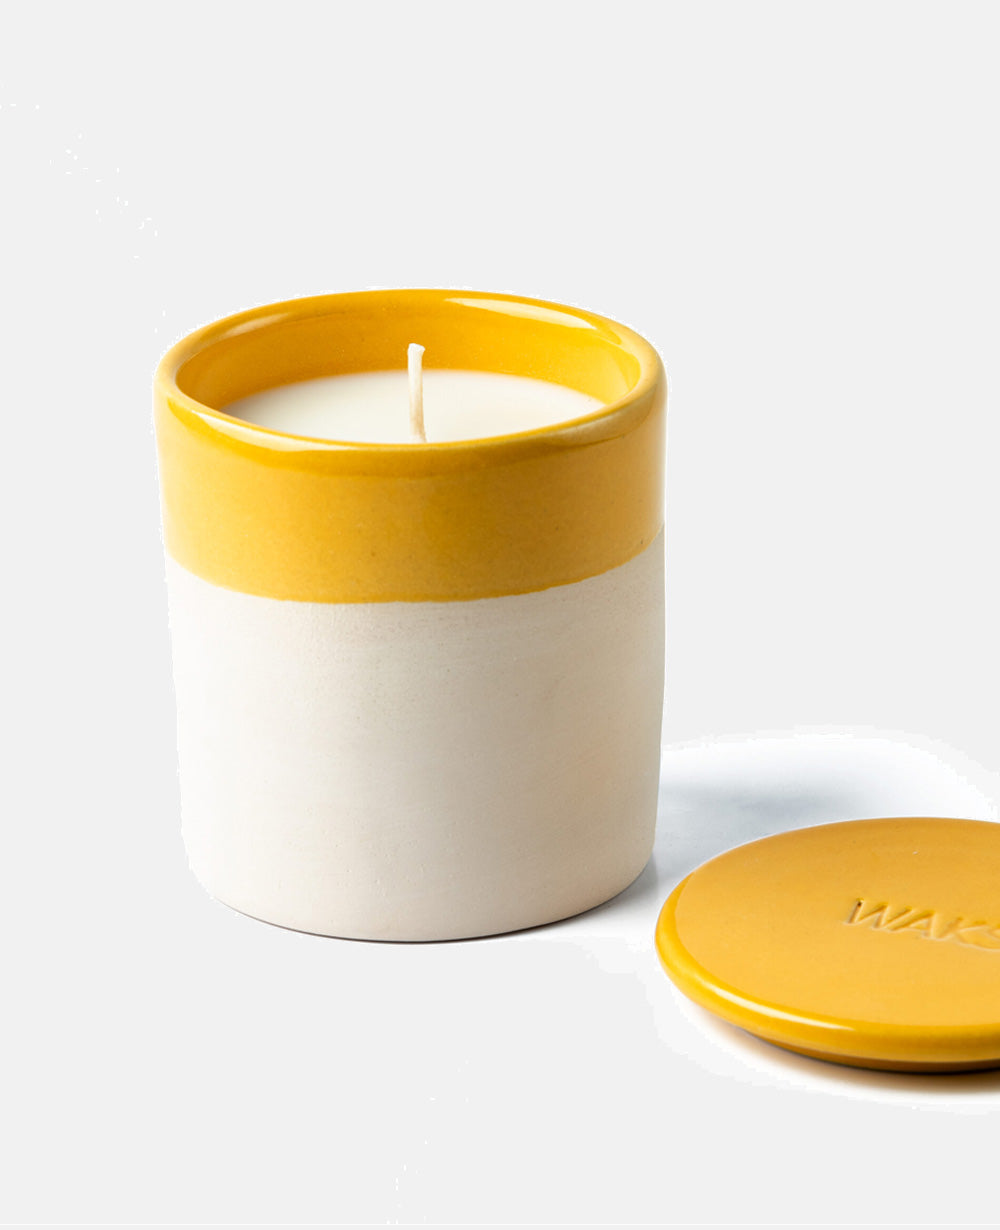 SCENTED CANDLE "CITRUS”